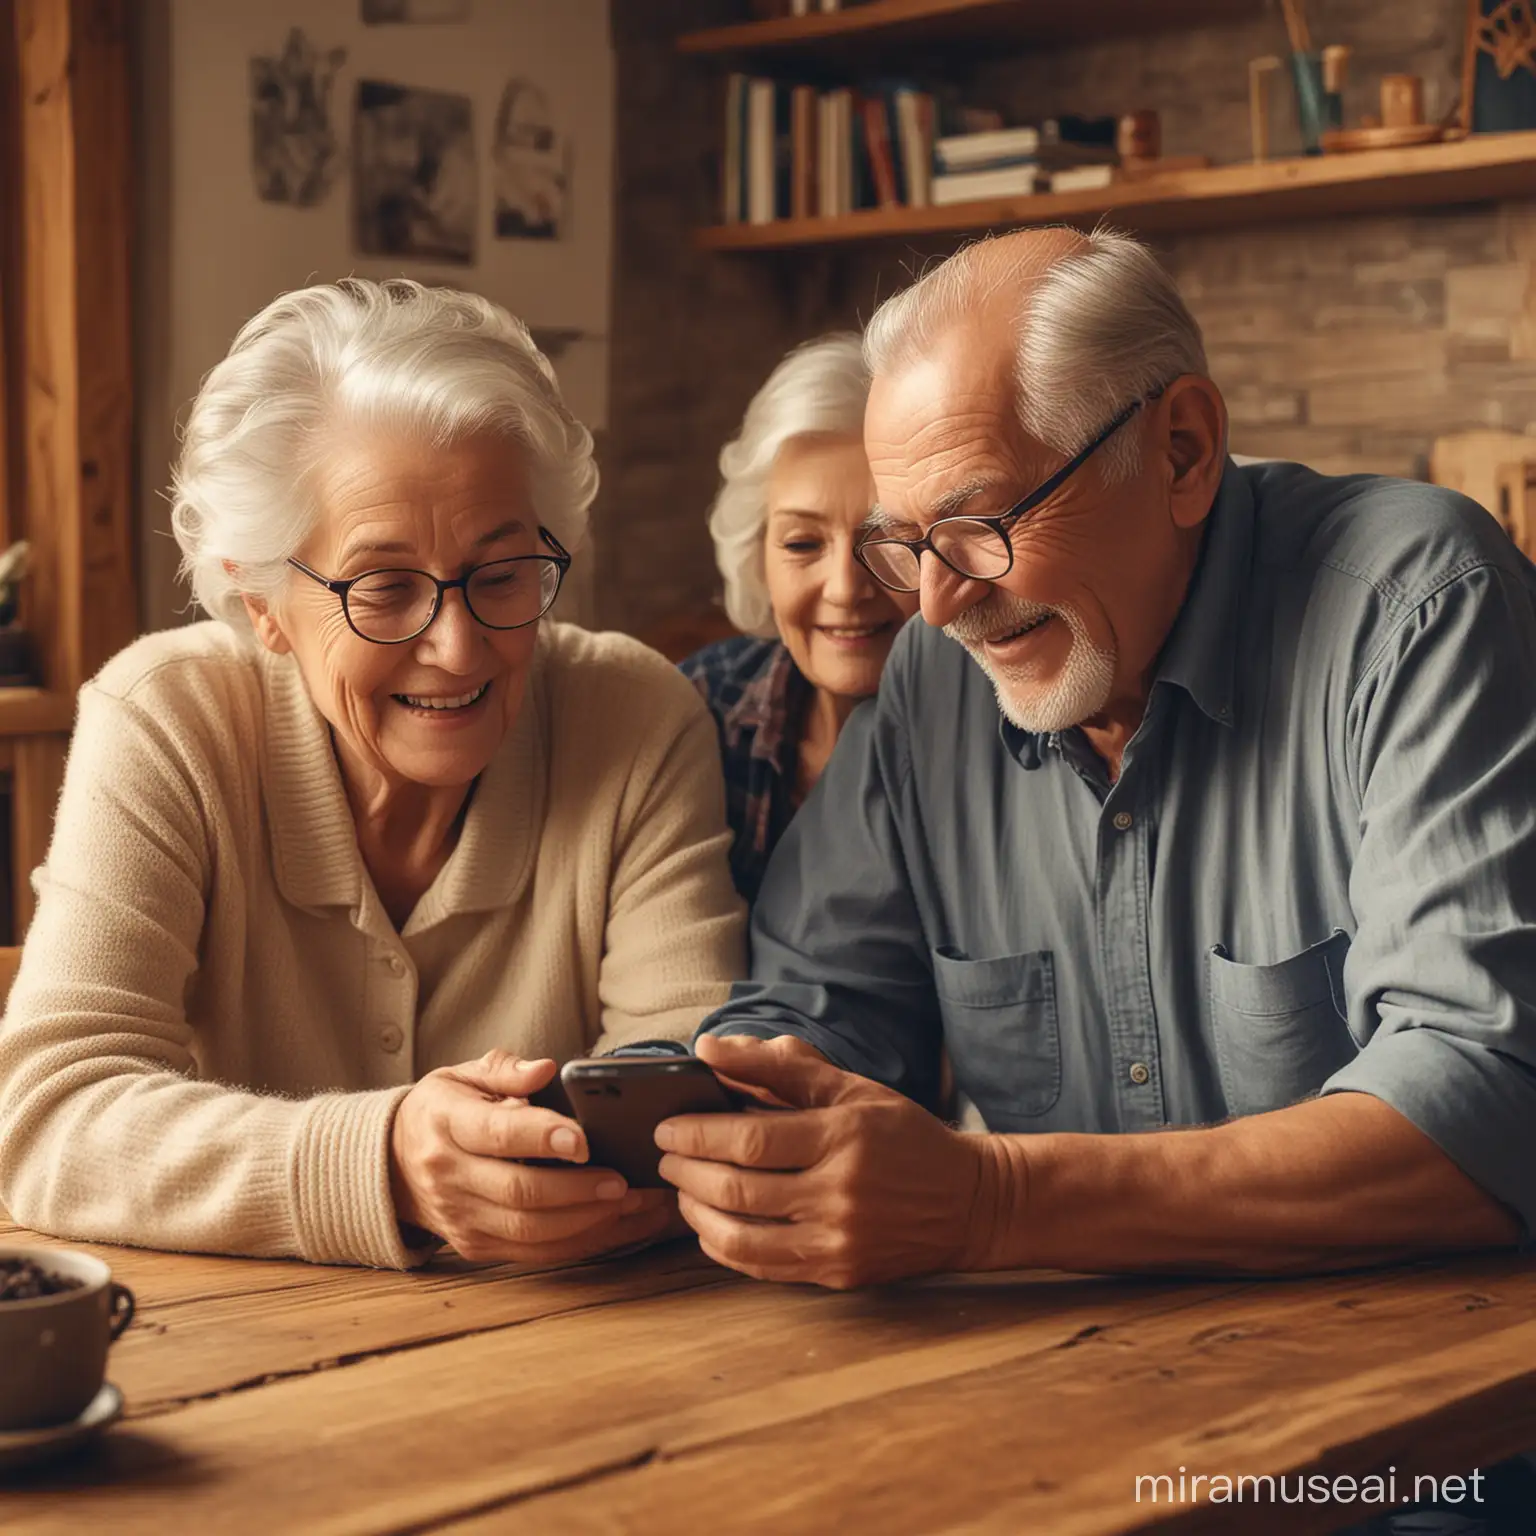 Two ederly adults, gandfather Grandmother having fun while learning using Smartphone, Background cosy woody home